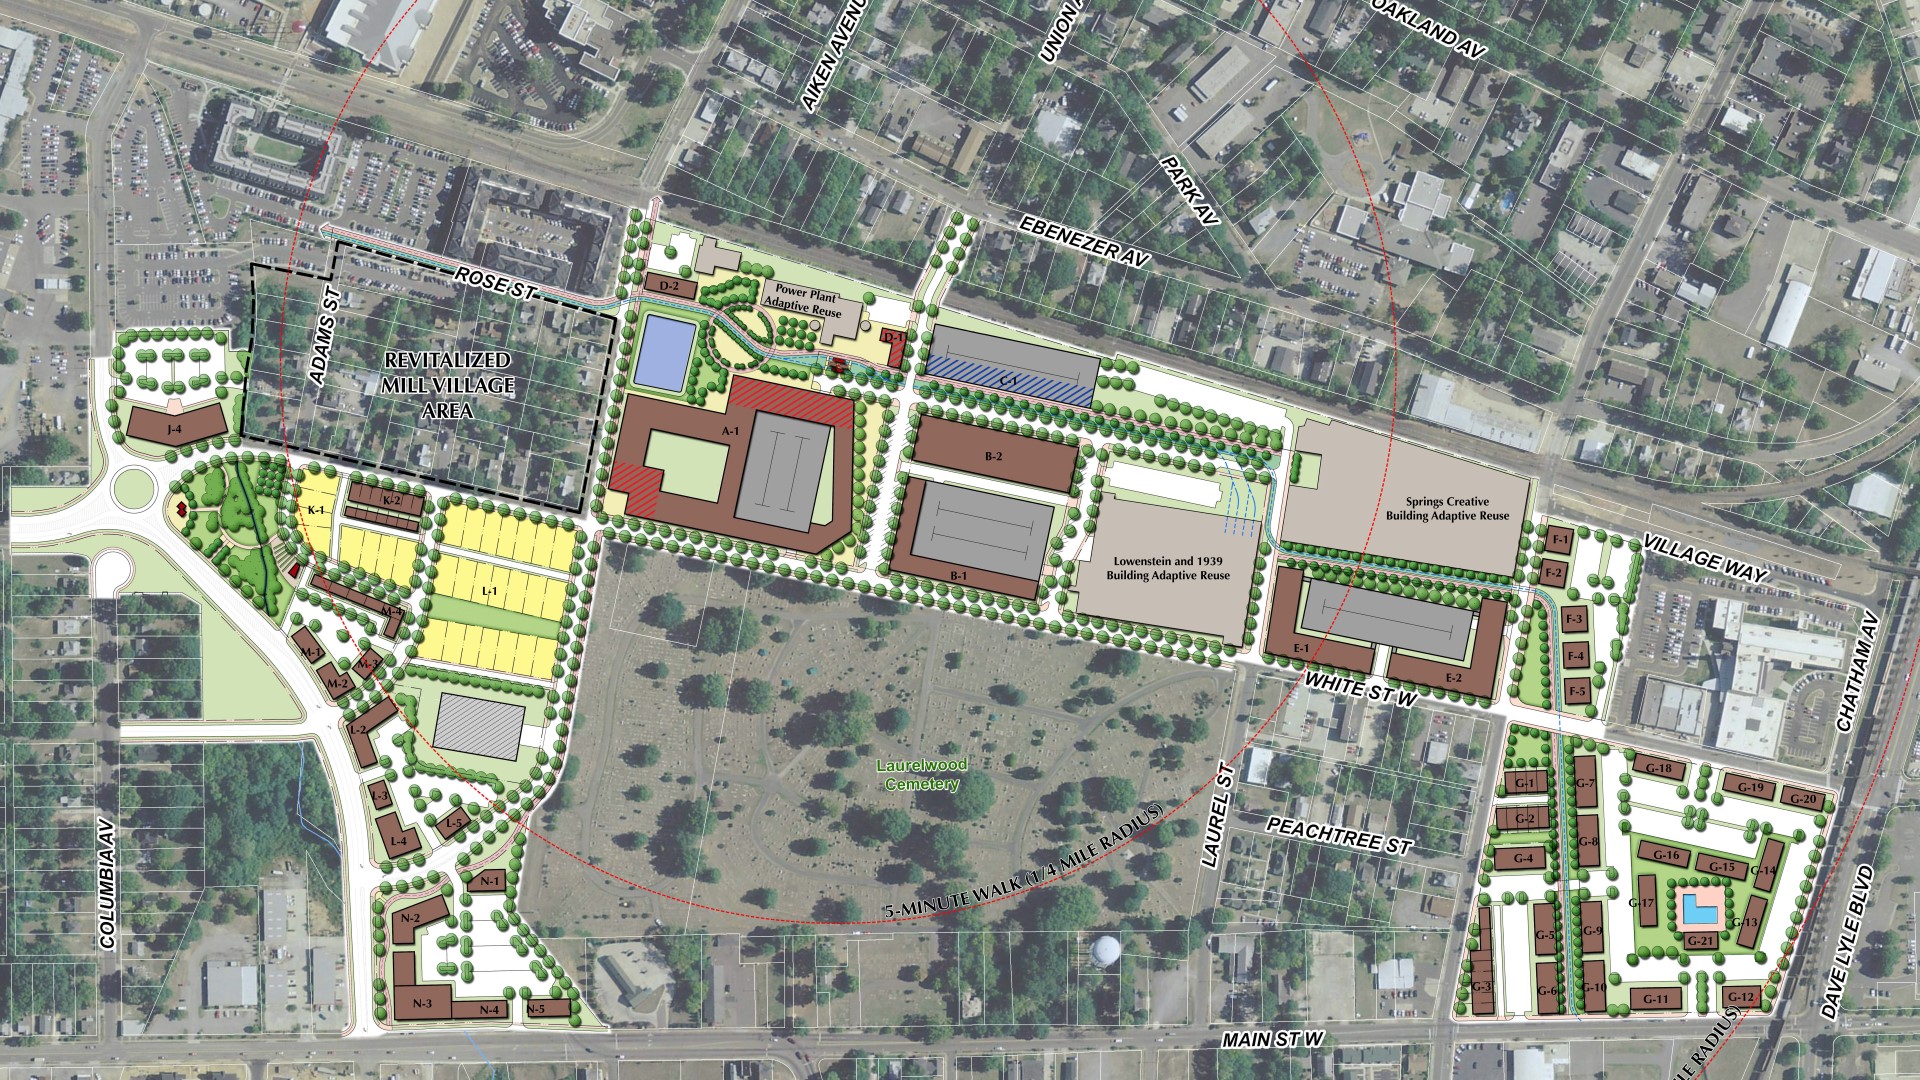 City of Rock Hill Knowledge Park Old Town Master Plan